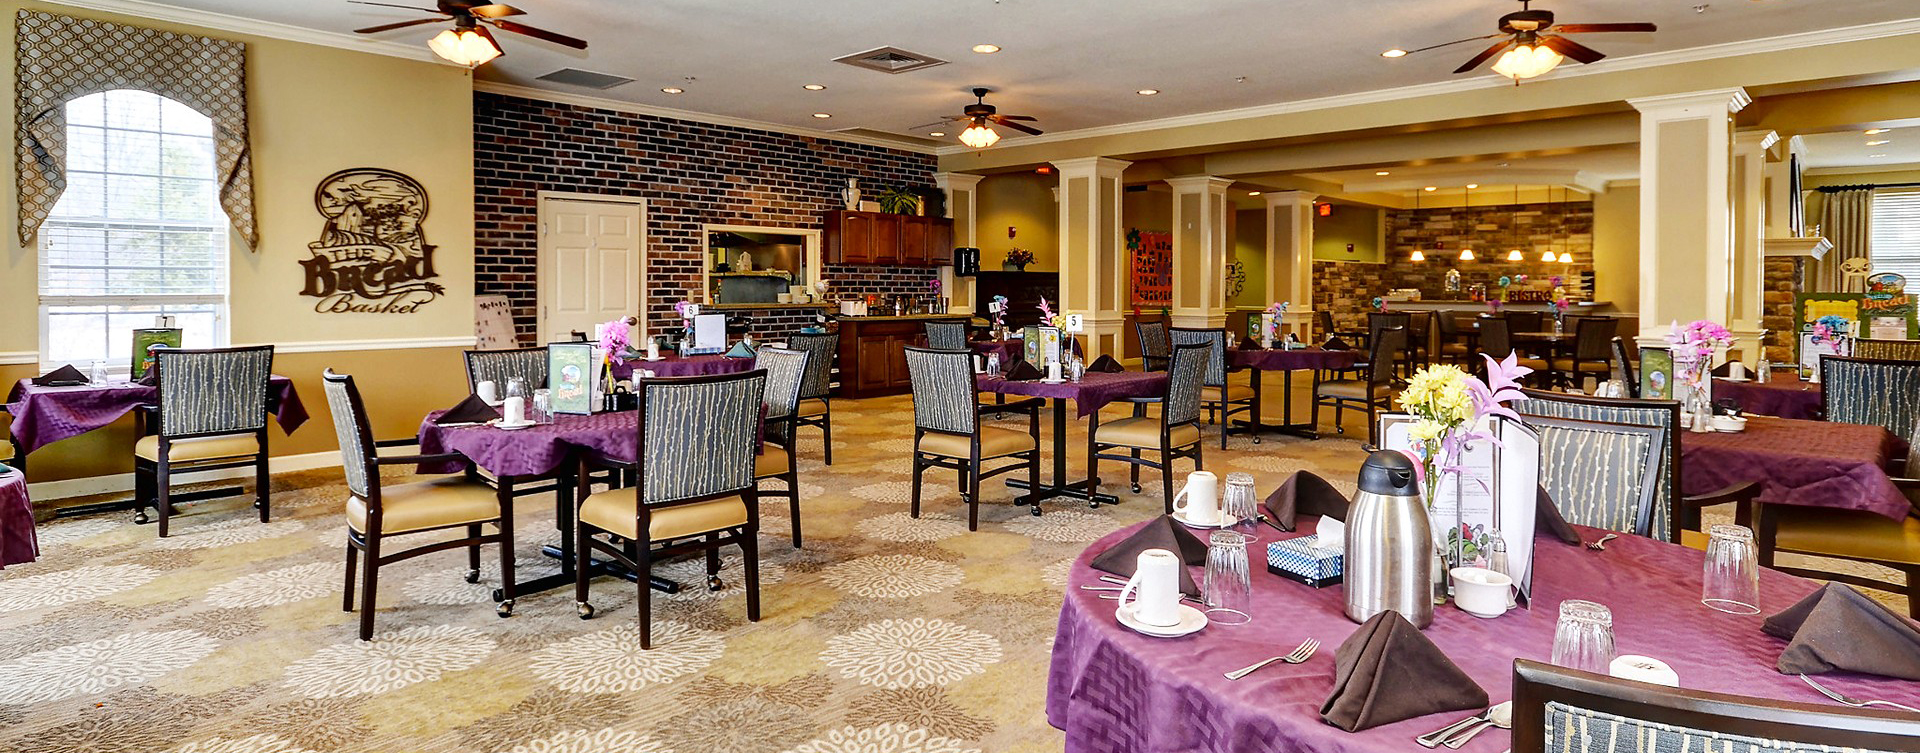 Enjoy homestyle food with made-from-scratch recipes in our dining room at Bickford of Crystal Lake